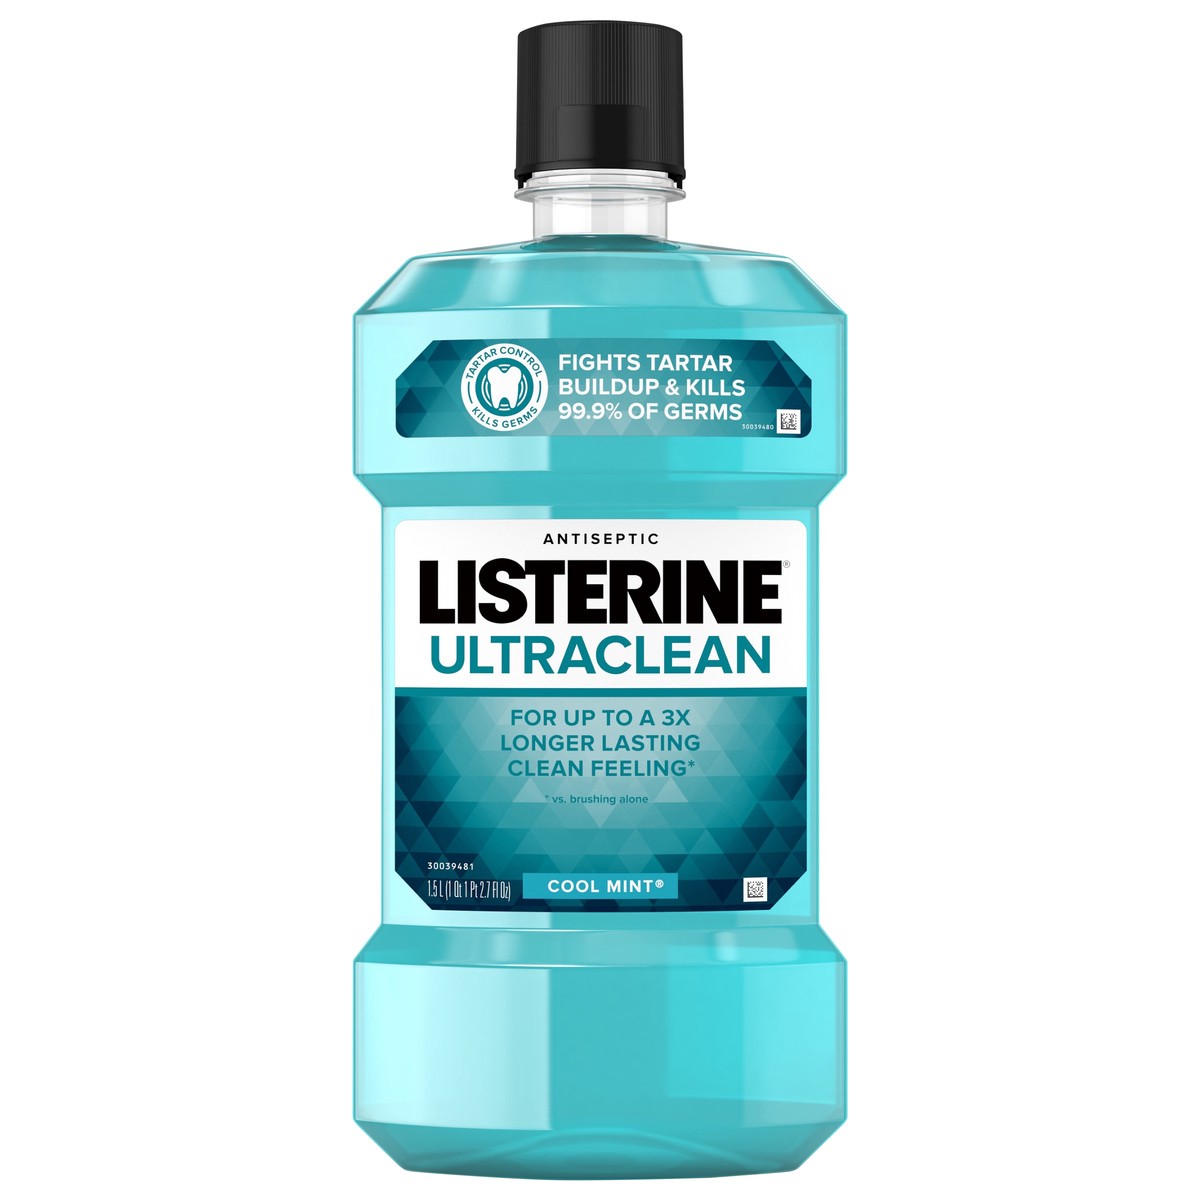 slide 1 of 7, Listerine Ultraclean Oral Care Antiseptic Mouthwash, Everfresh Technology to Help Fight Bad Breath, Gingivitis, Plaque & Tartar, ADA-Accepted Tartar Control Oral Rinse, Cool Mint, 1.5 L, 1.50 liter